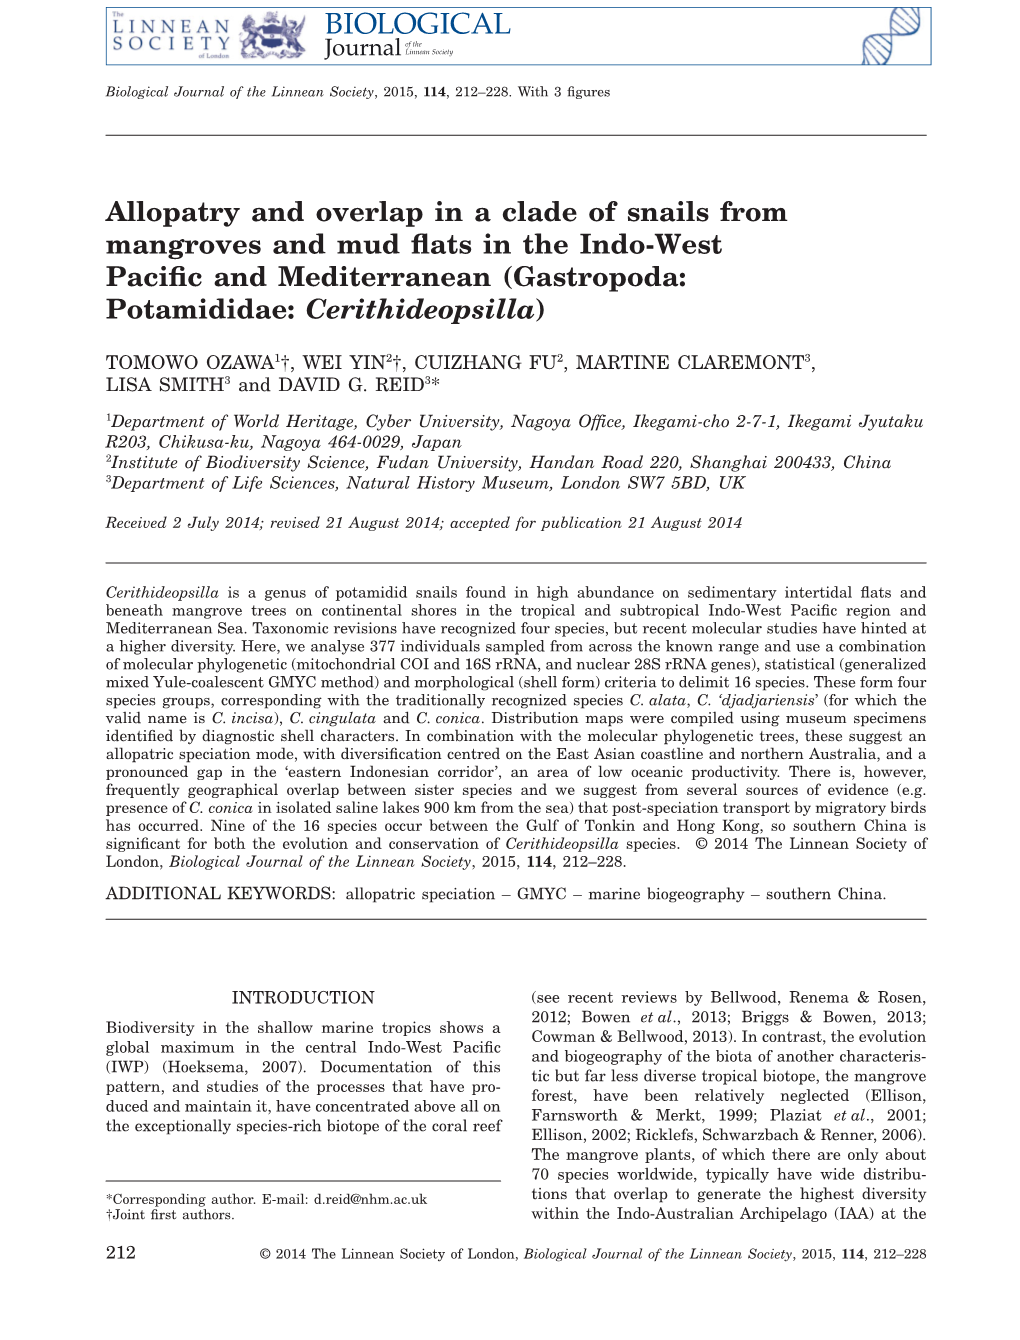 Allopatry and Overlap in a Clade of Snails from Mangroves and Mud ﬂats in the Indo-West Paciﬁc and Mediterranean (Gastropoda: Potamididae: Cerithideopsilla)